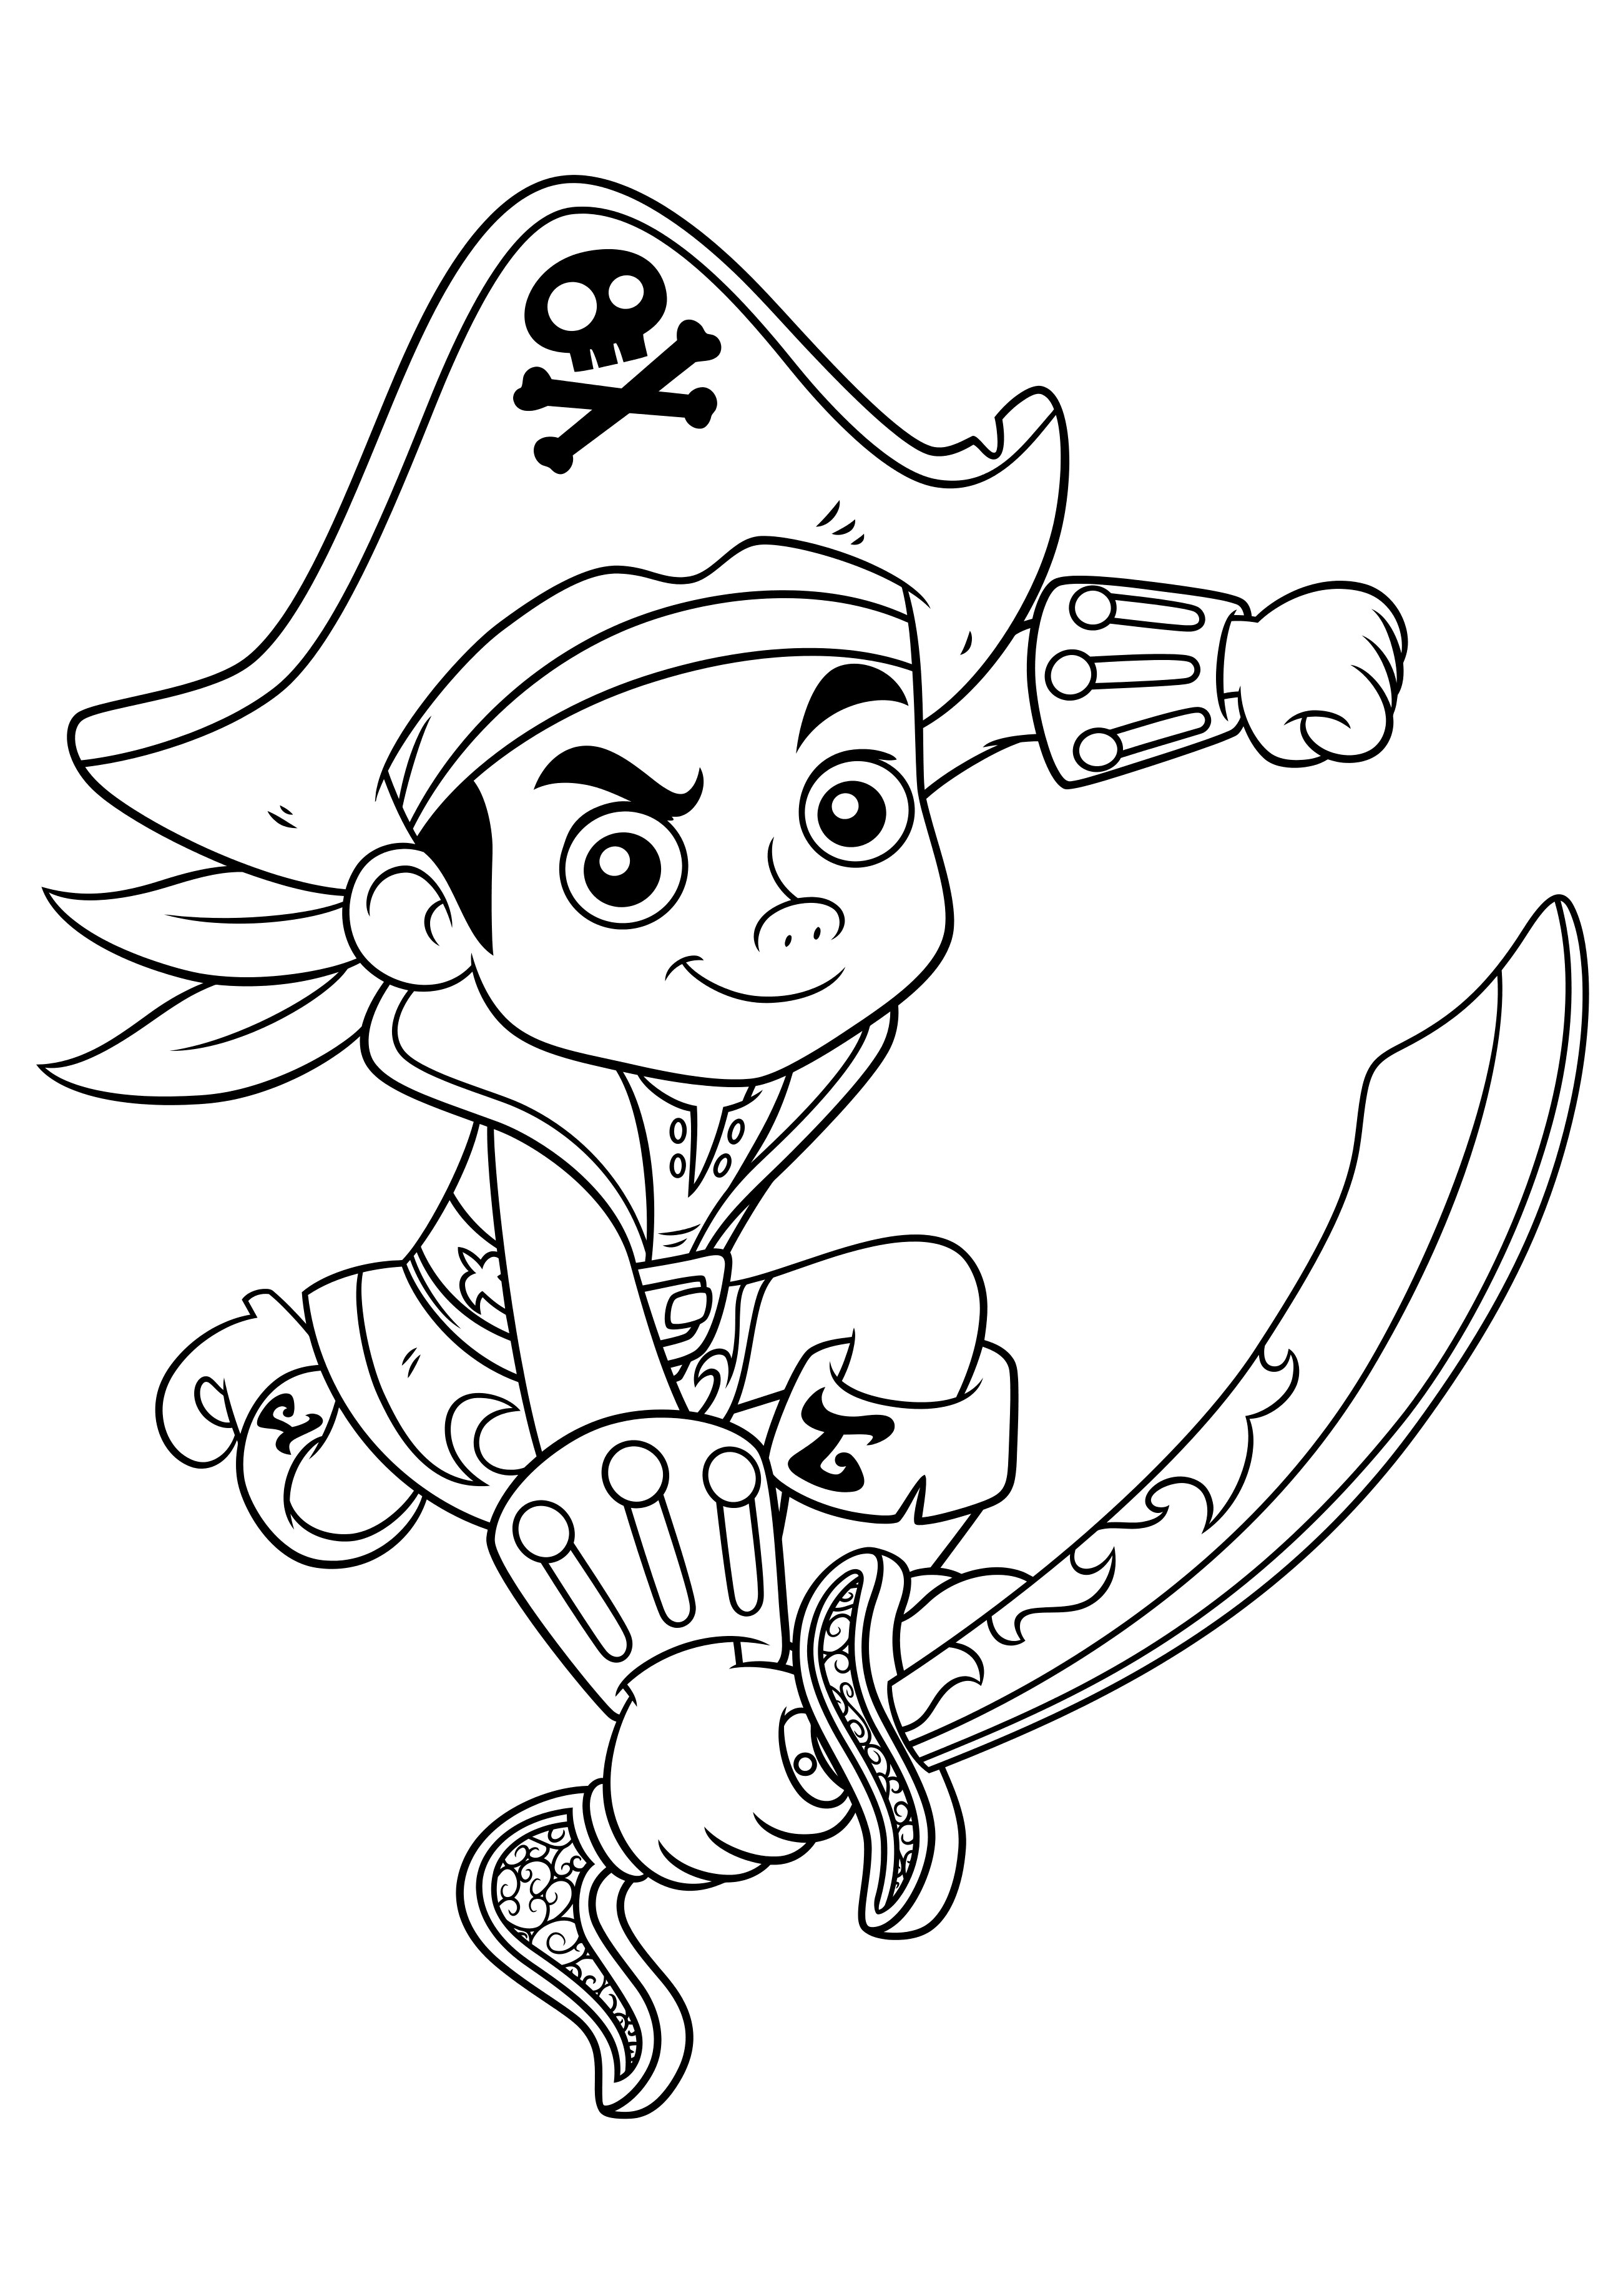 Coloring page Jake and the Never Land Pirates Captain Jack